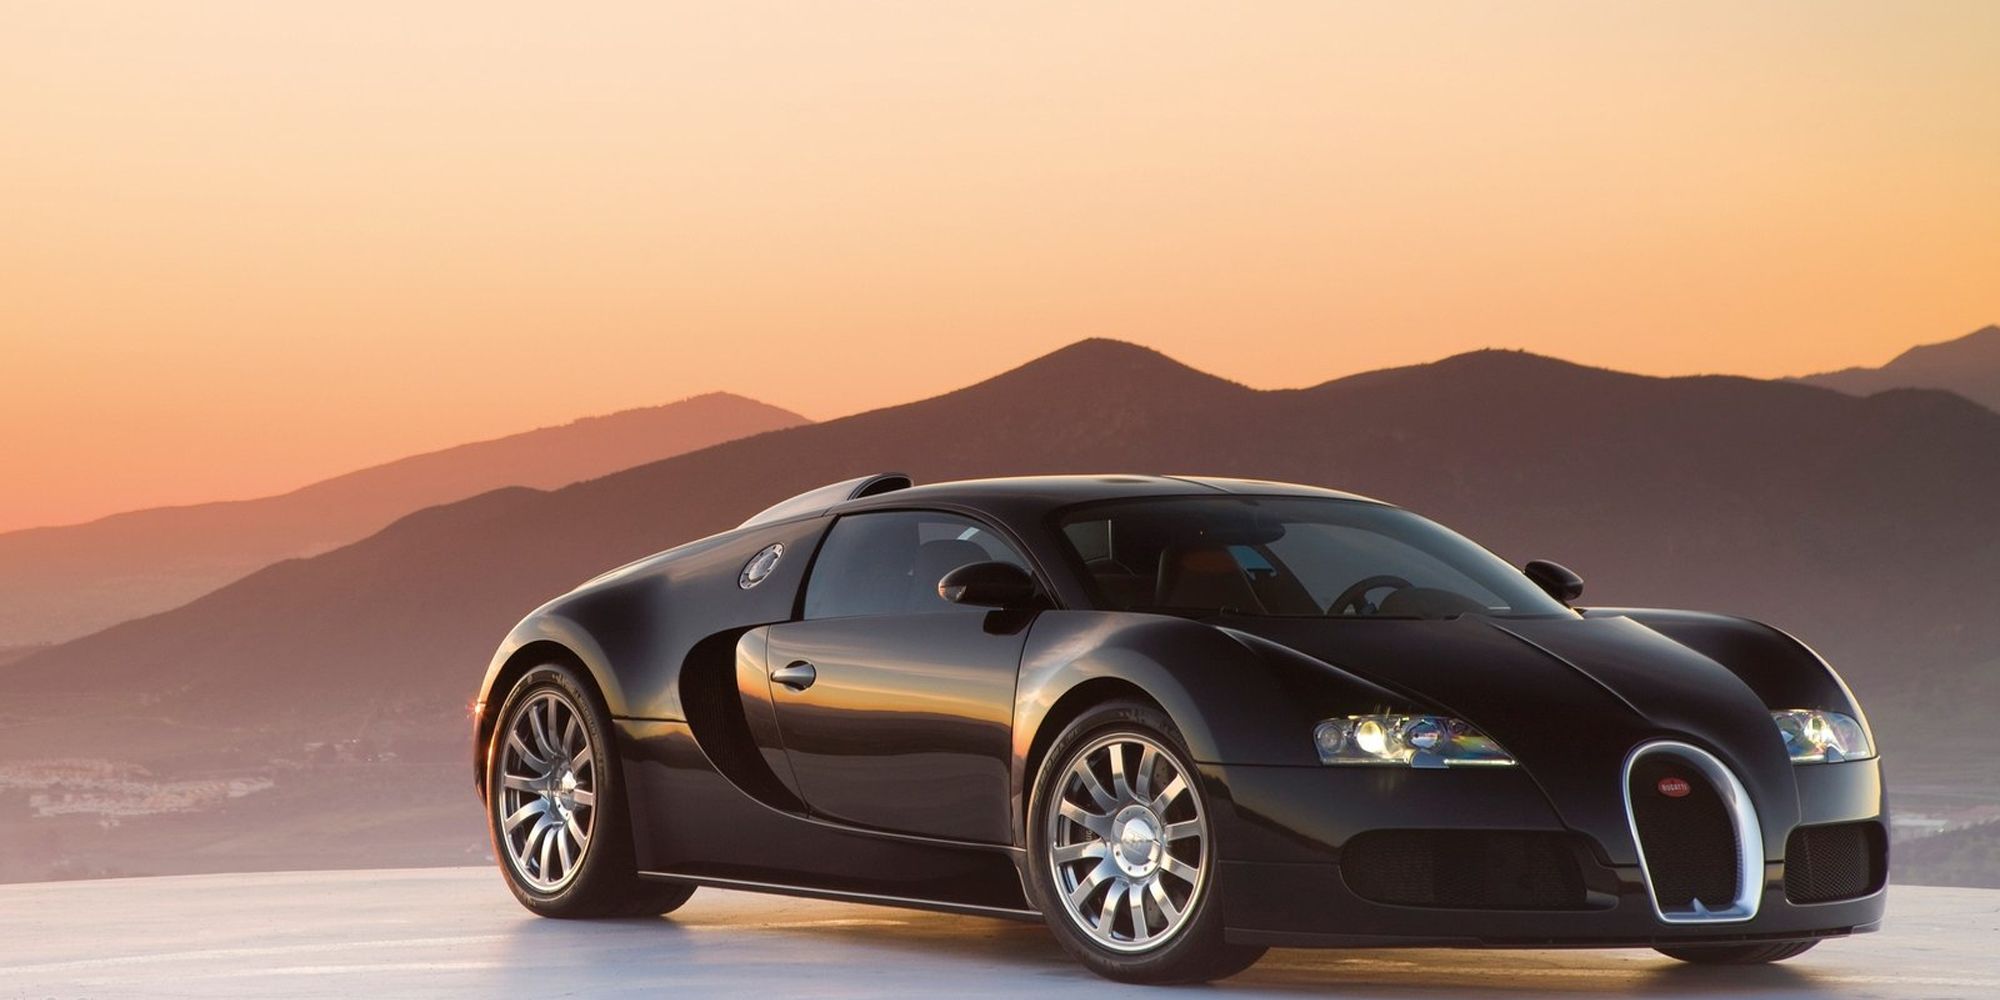 Front 3/4 view of a black Veyron